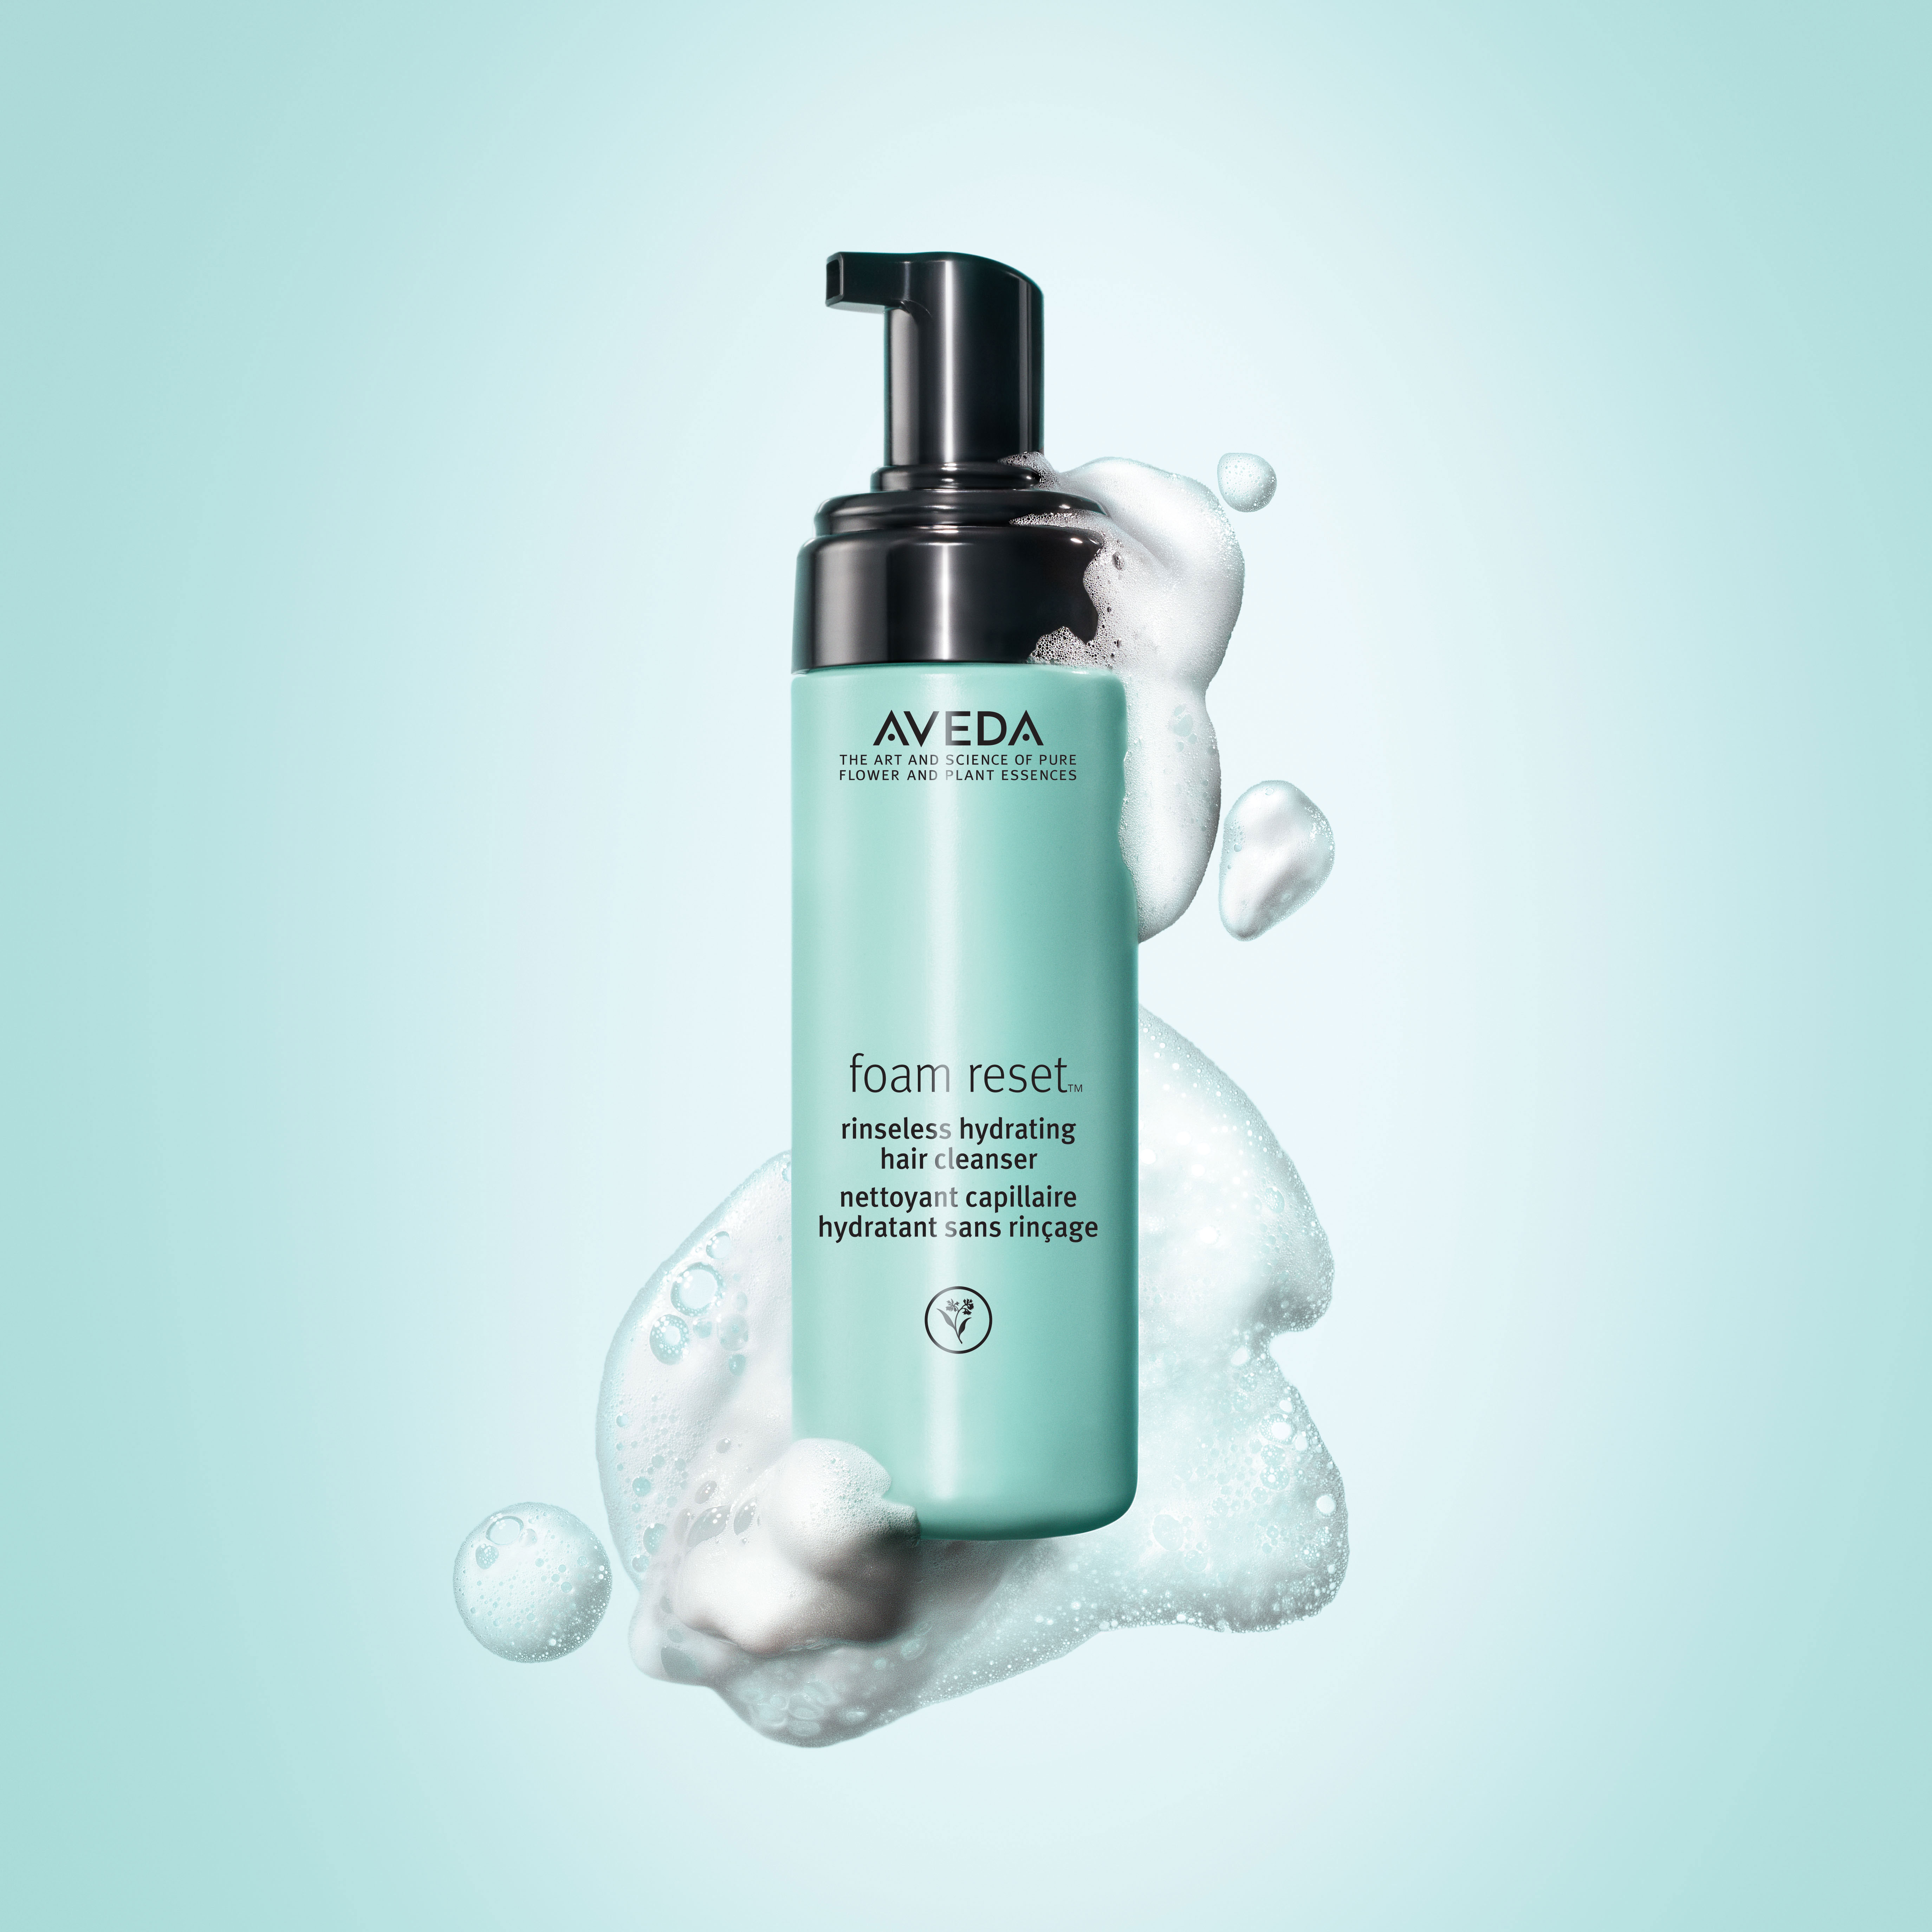 A bottle of aveda foam reset hair cleanser surrounded by bubbles on a teal background. - K. Charles & Co. in San Antonio and Schertz, TX